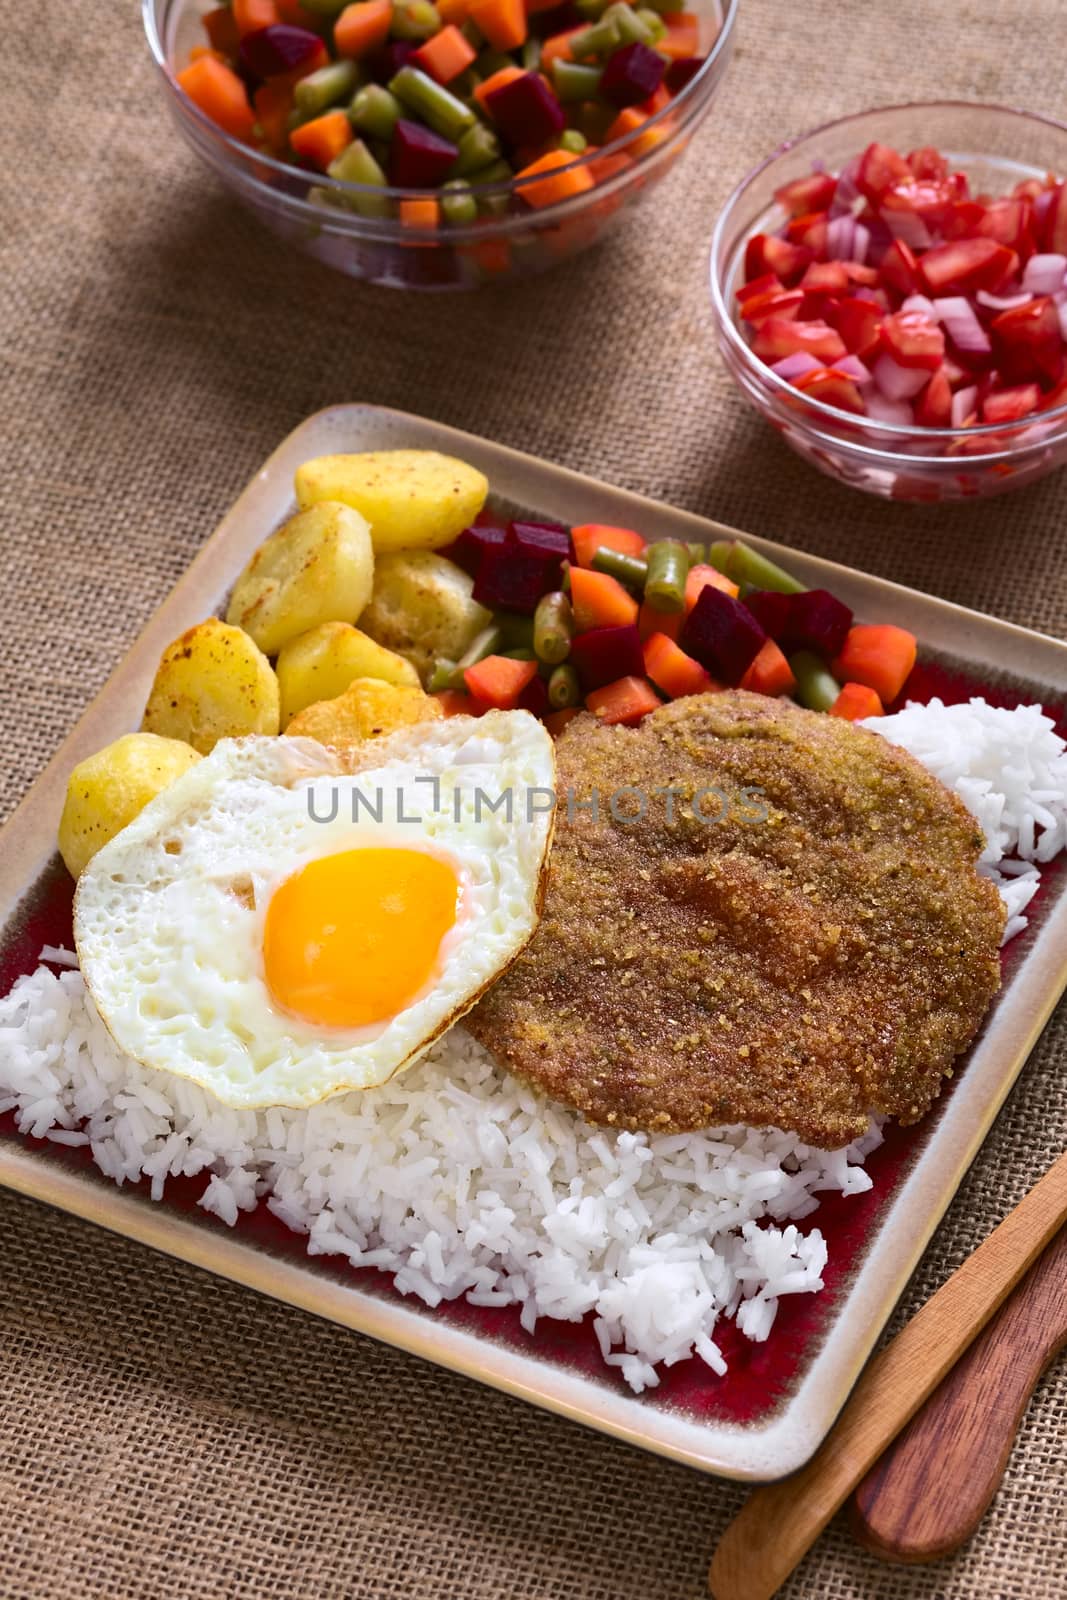 Traditional Bolivian dish called Silpancho, which is the name of the breaded flat, round piece of beef meat, served with fried egg, rice, fried potatoes and vegetables (carrot, bean, beetroot), photographed with natural light (Selective Focus, Focus one third into the dish)